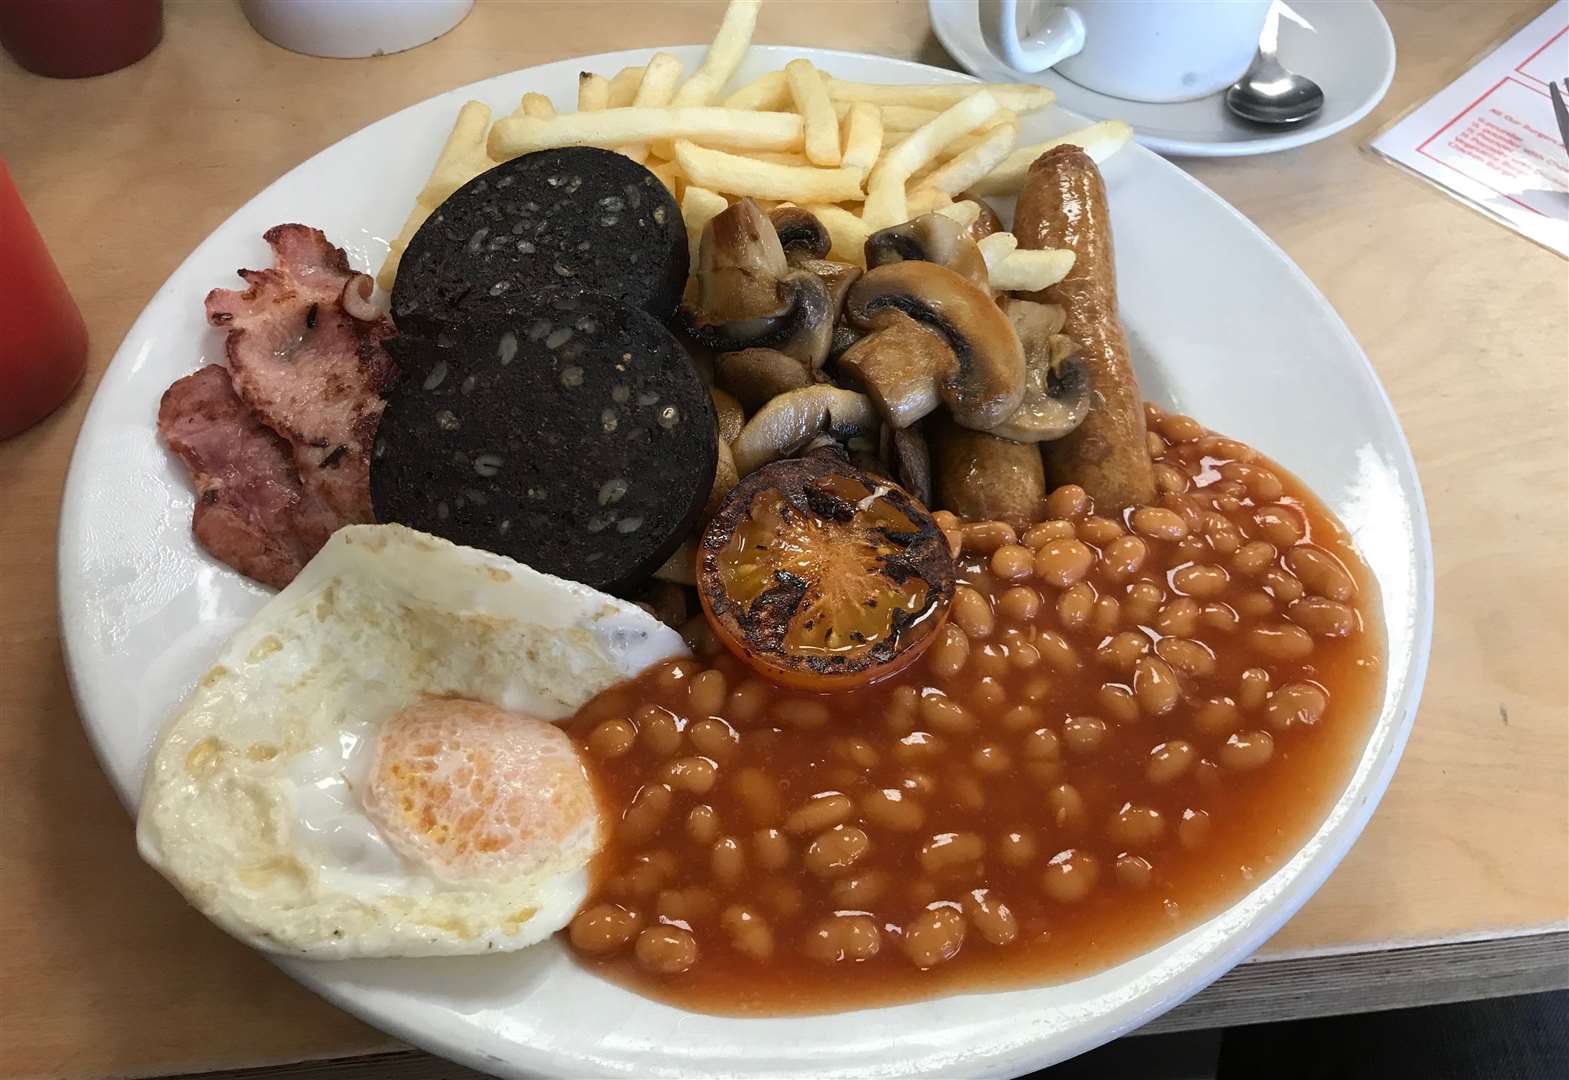 A belly buster of a full English